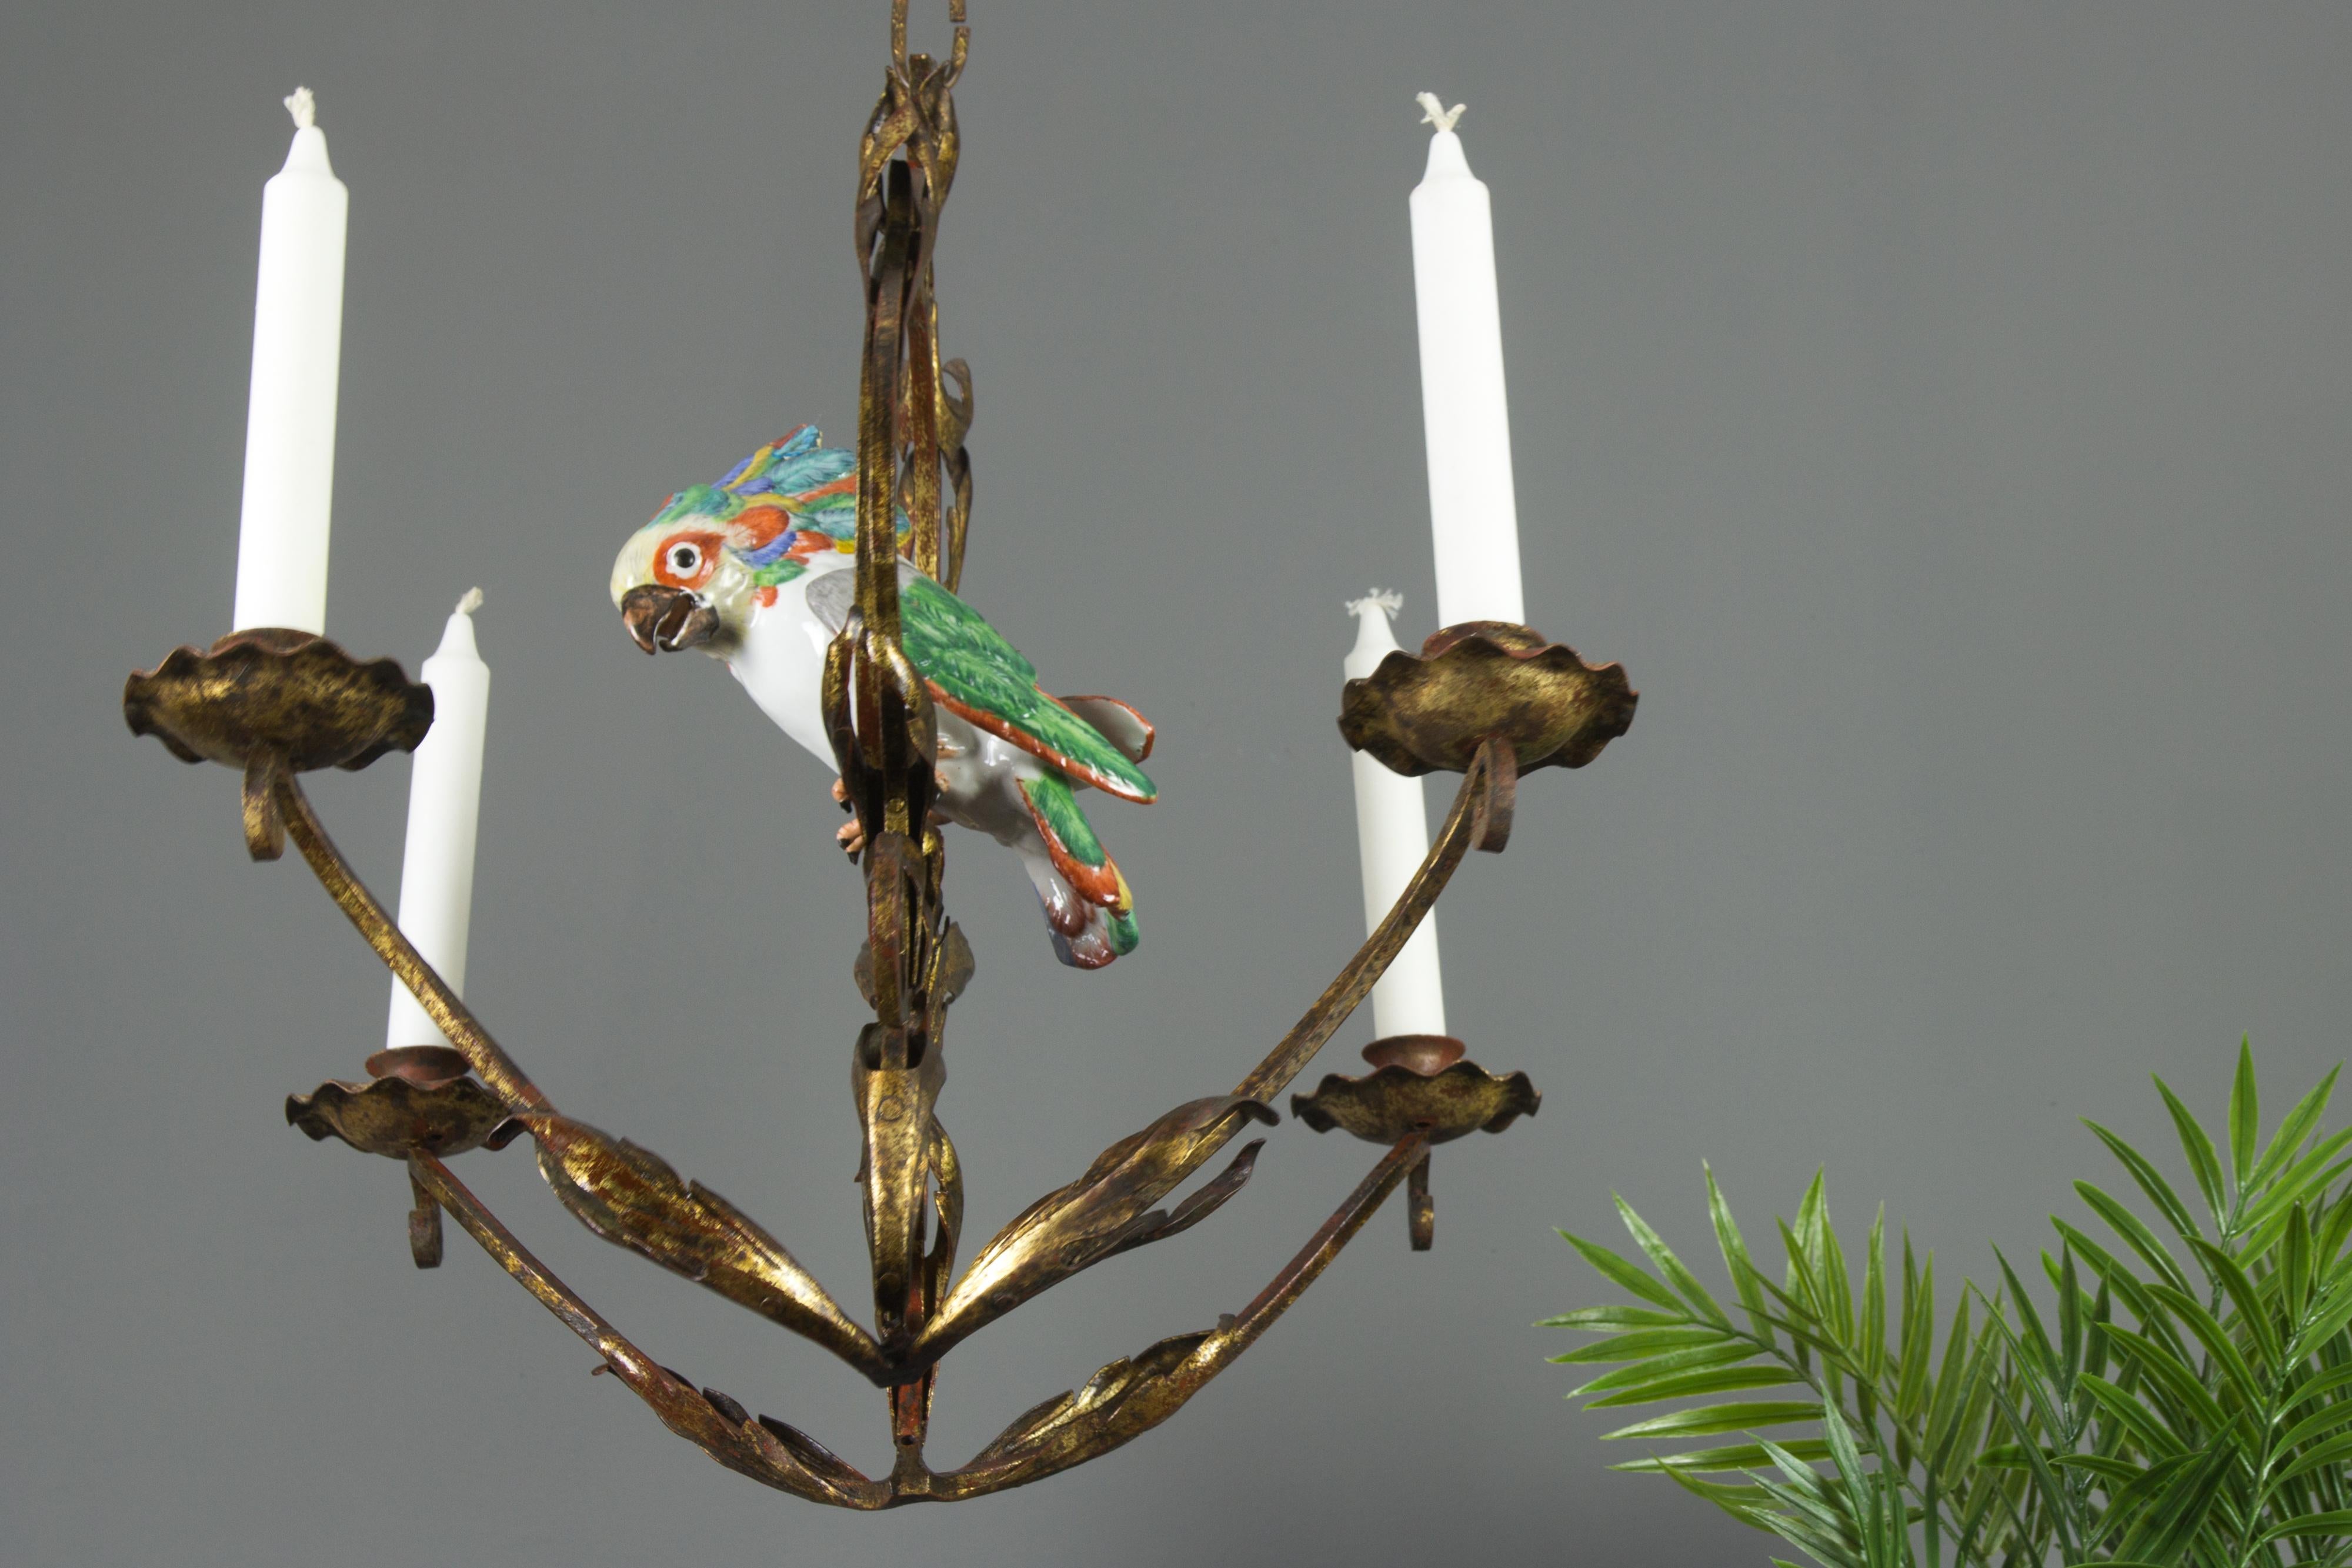 Early 20th Century French Art Nouveau Wrought Iron and Porcelain Parrot Figurine Candle Chandelier